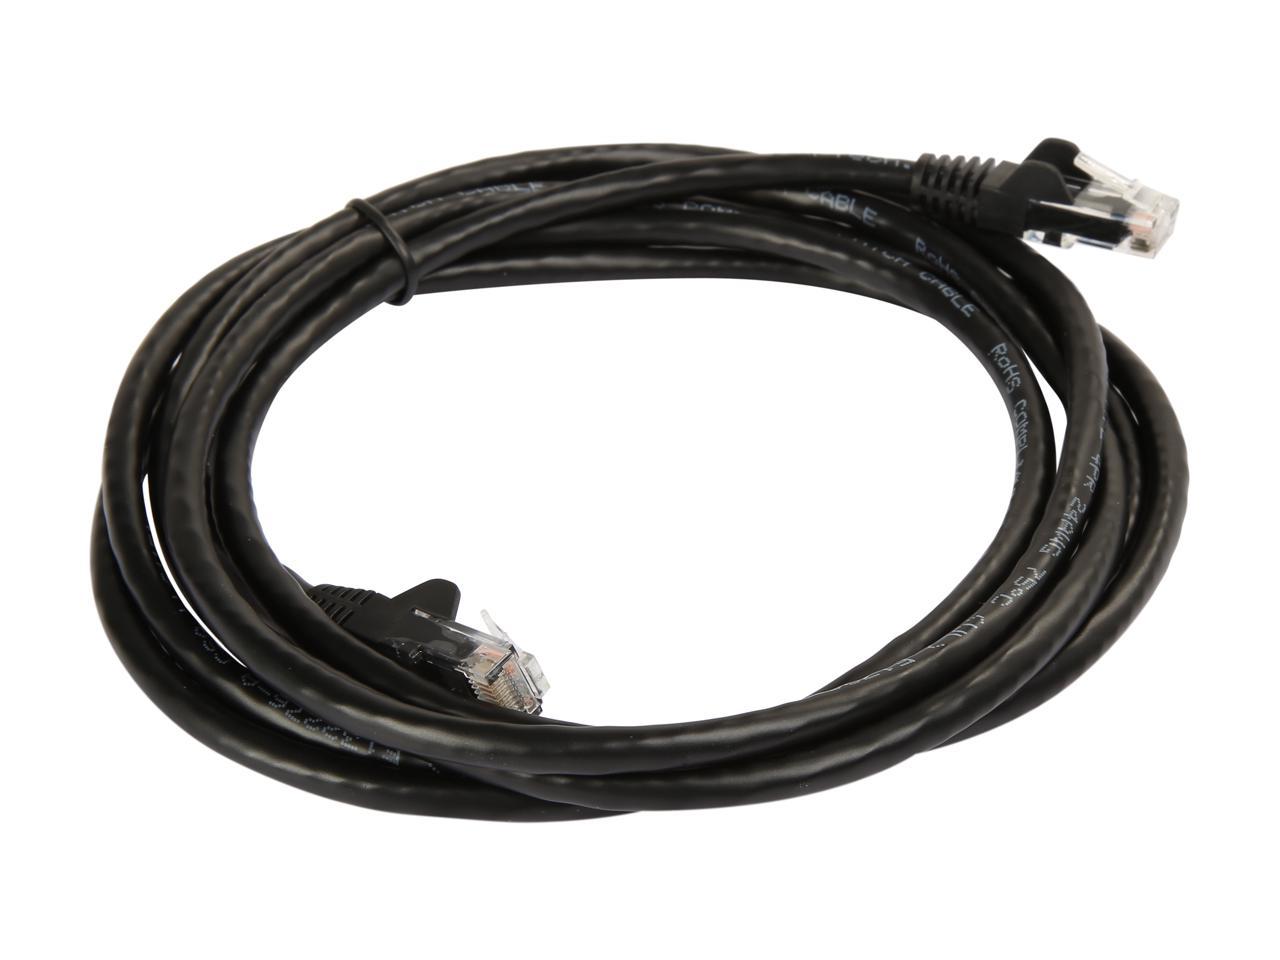 StarTech N6PATCH8BK StarTech.com Cat6 Patch Cable - 8 ft - Black Ethernet Cable - Snagless RJ45 Cable - Ethernet Cord - Cat 6 Cable - 8ft